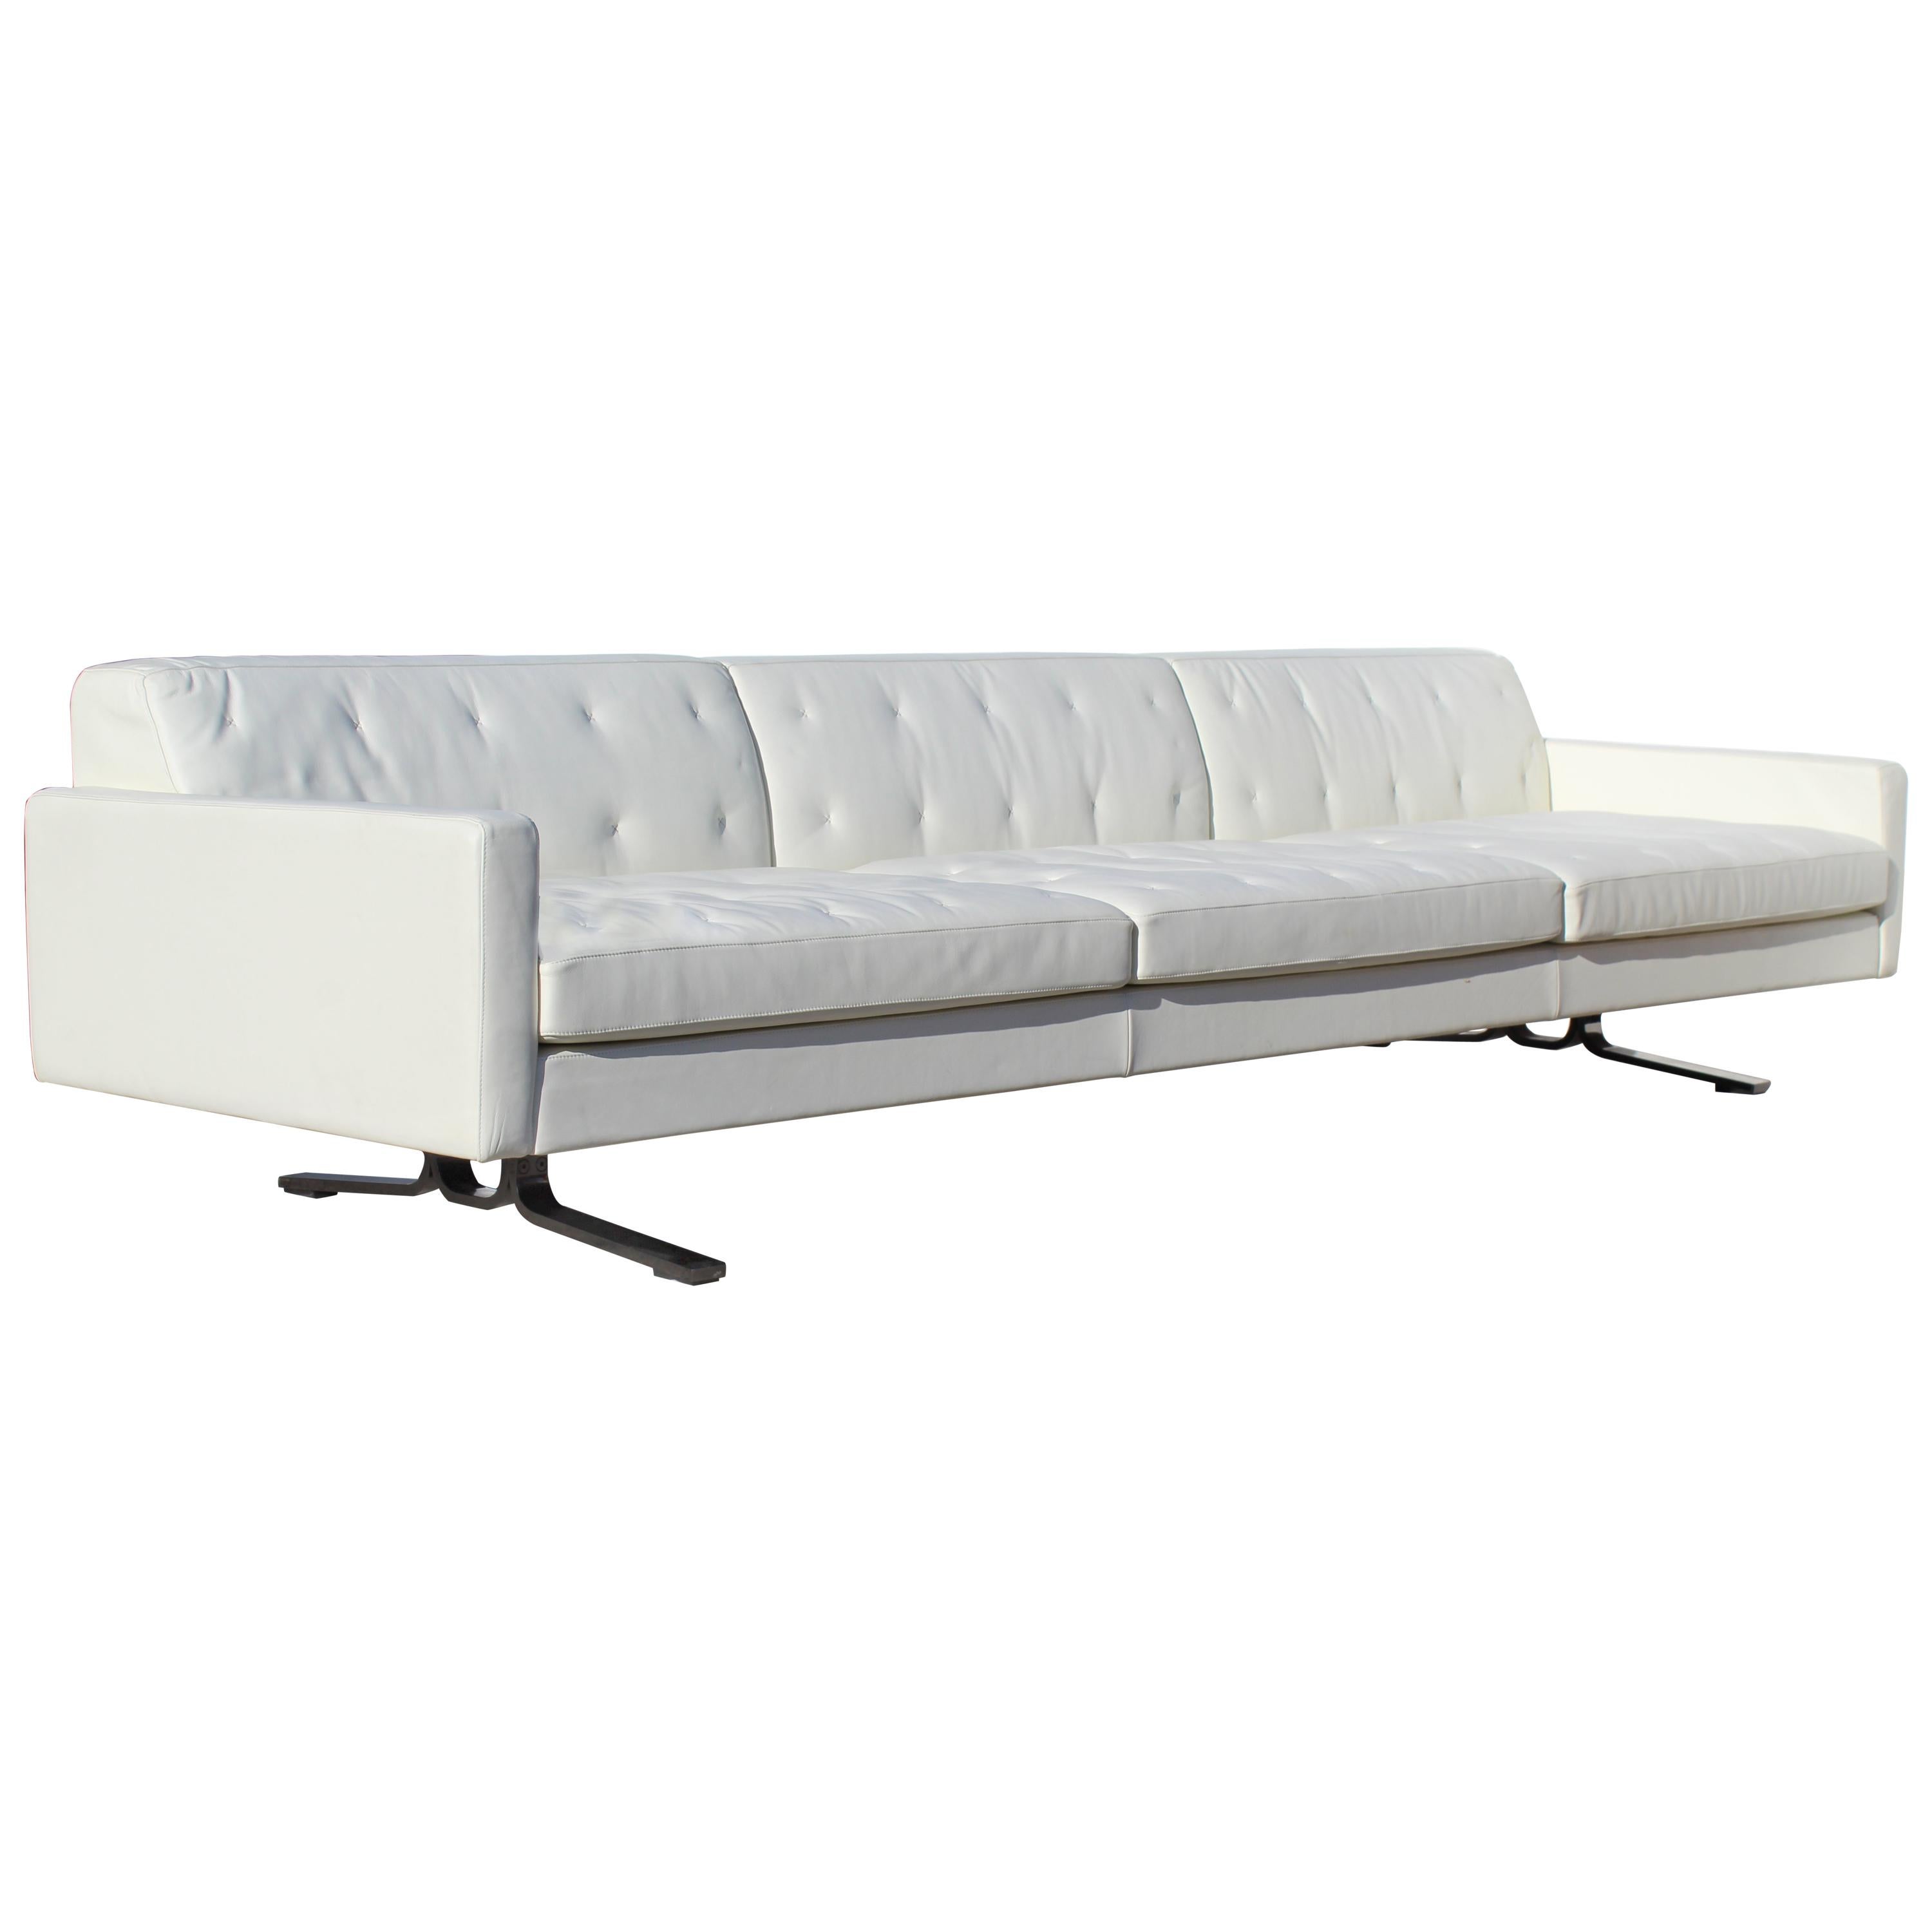 Over-Scale Poltona Frau 'Italy' Leather Sofa with Stainless Steel 